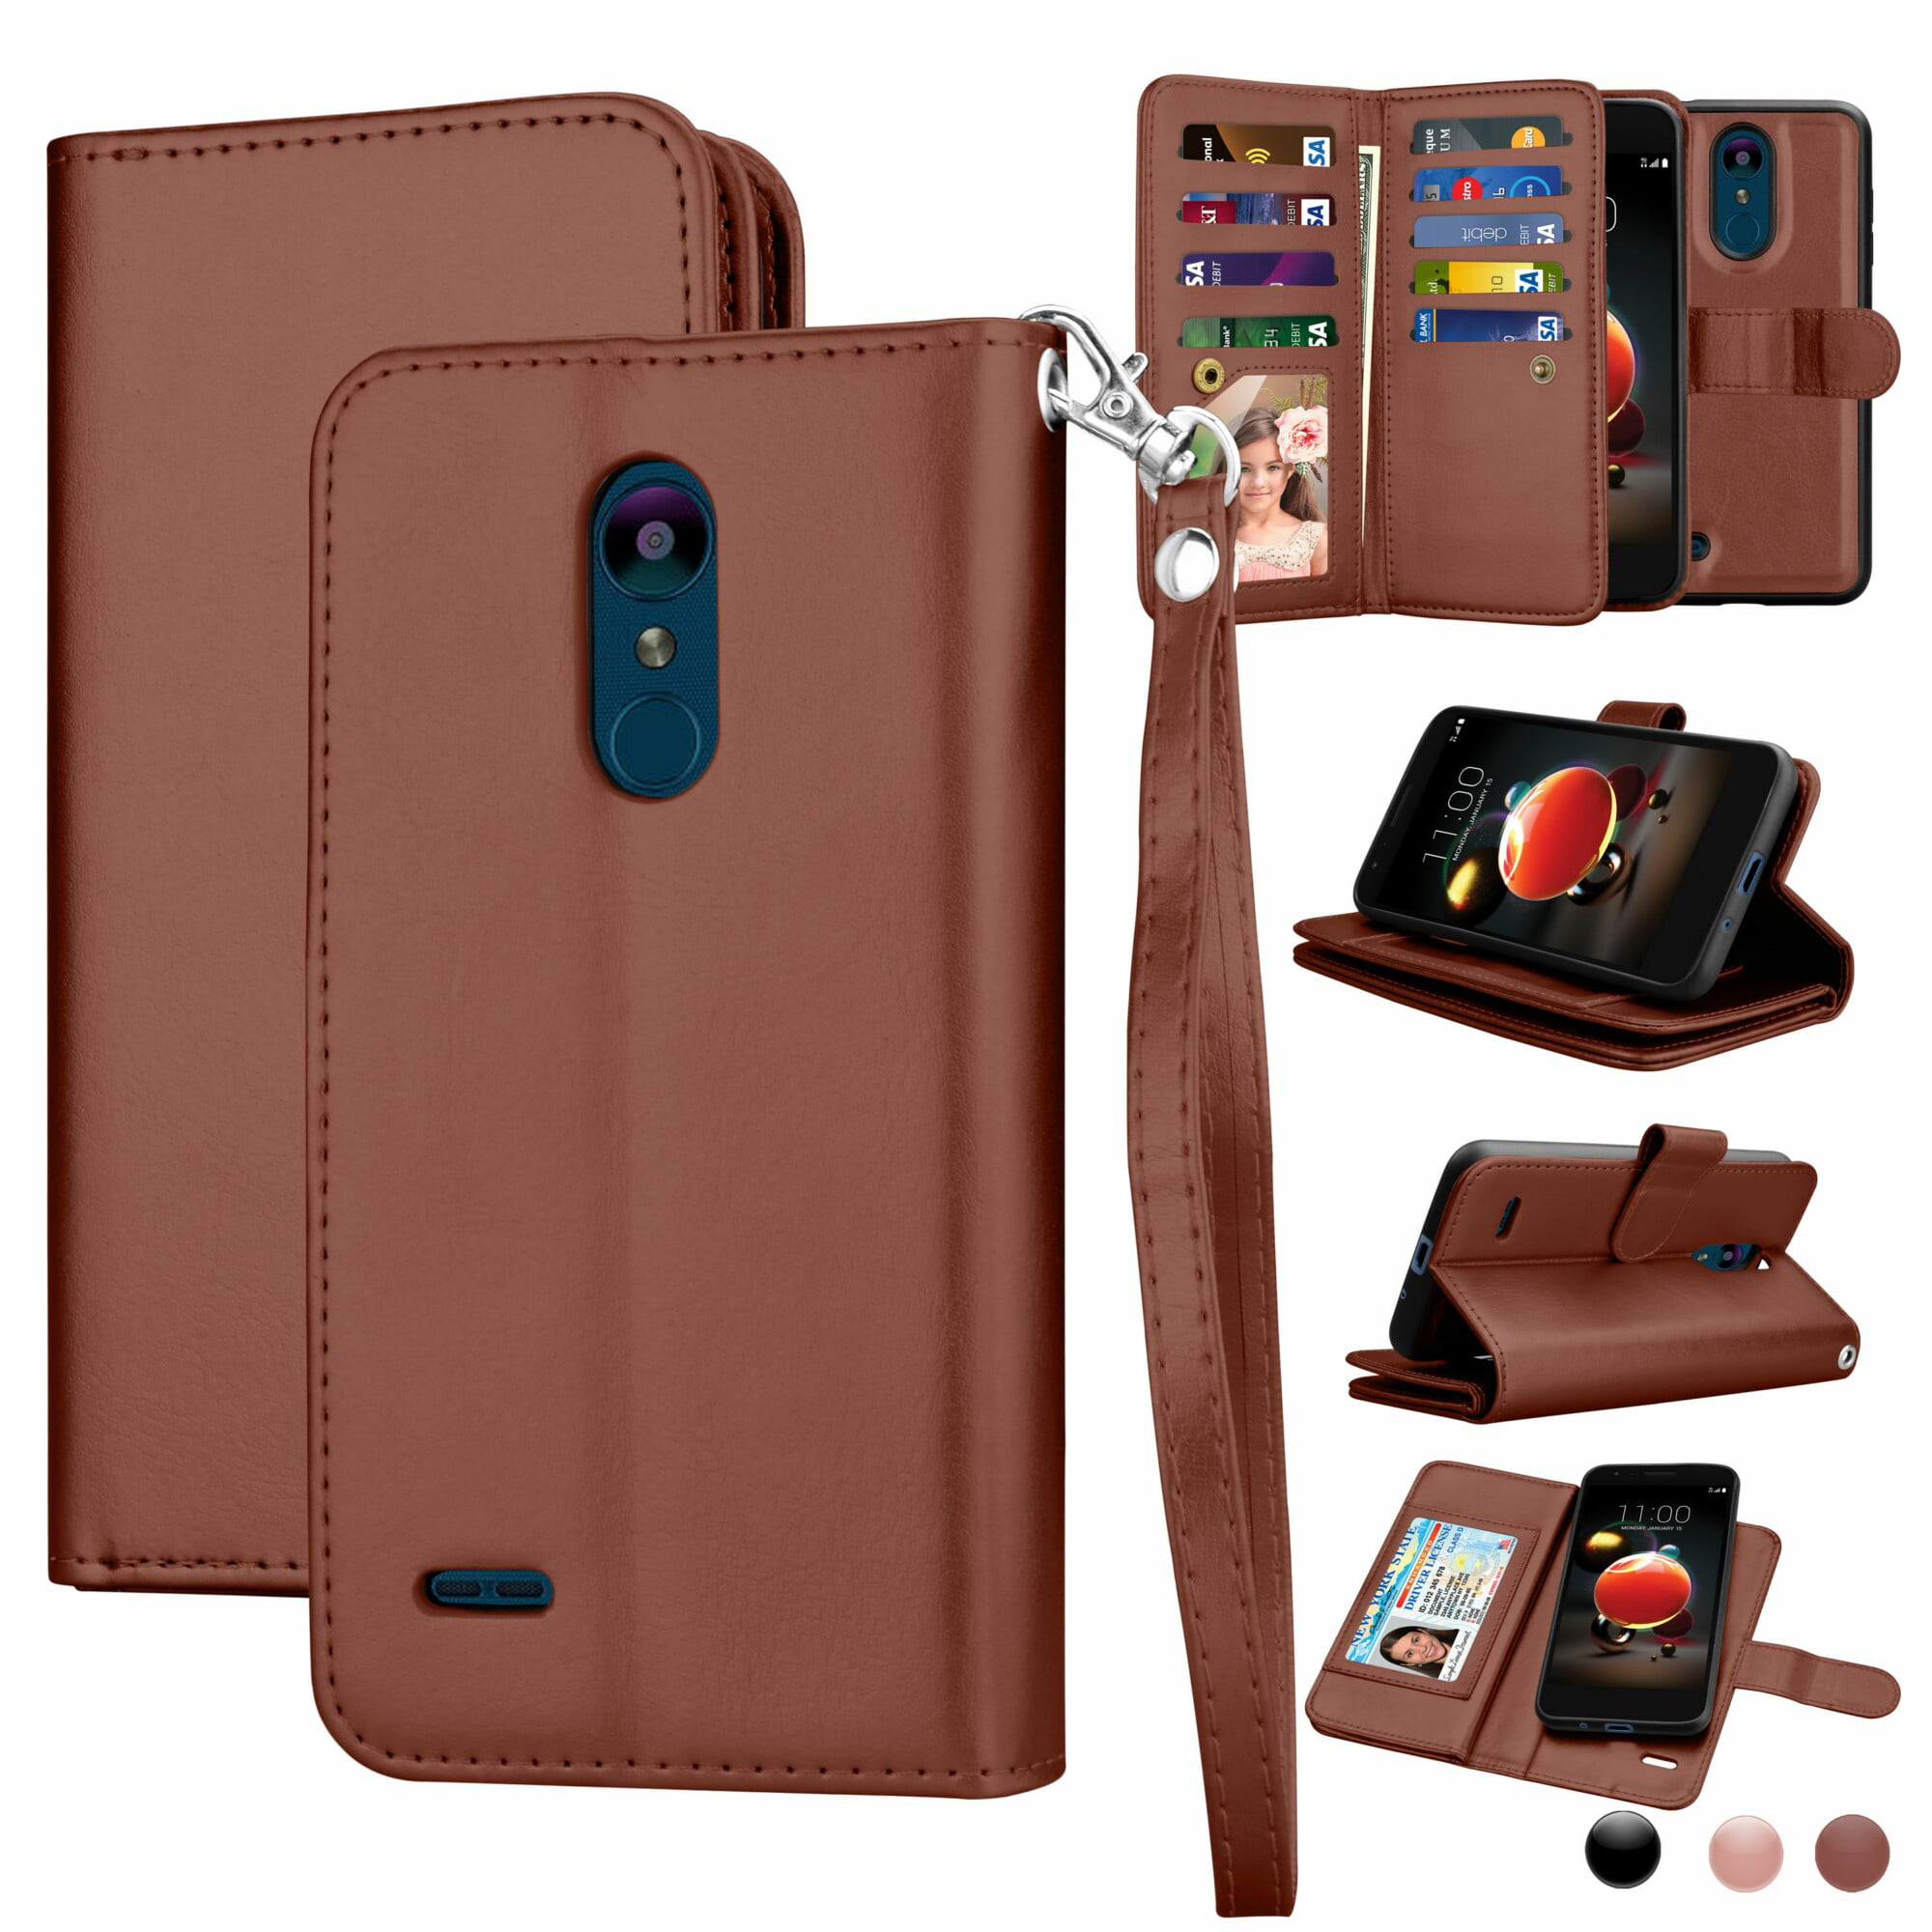 Ostop Colorful Painted Leather Wallet Case for LG K8/K10/K30 2018/LG Aristo 2 